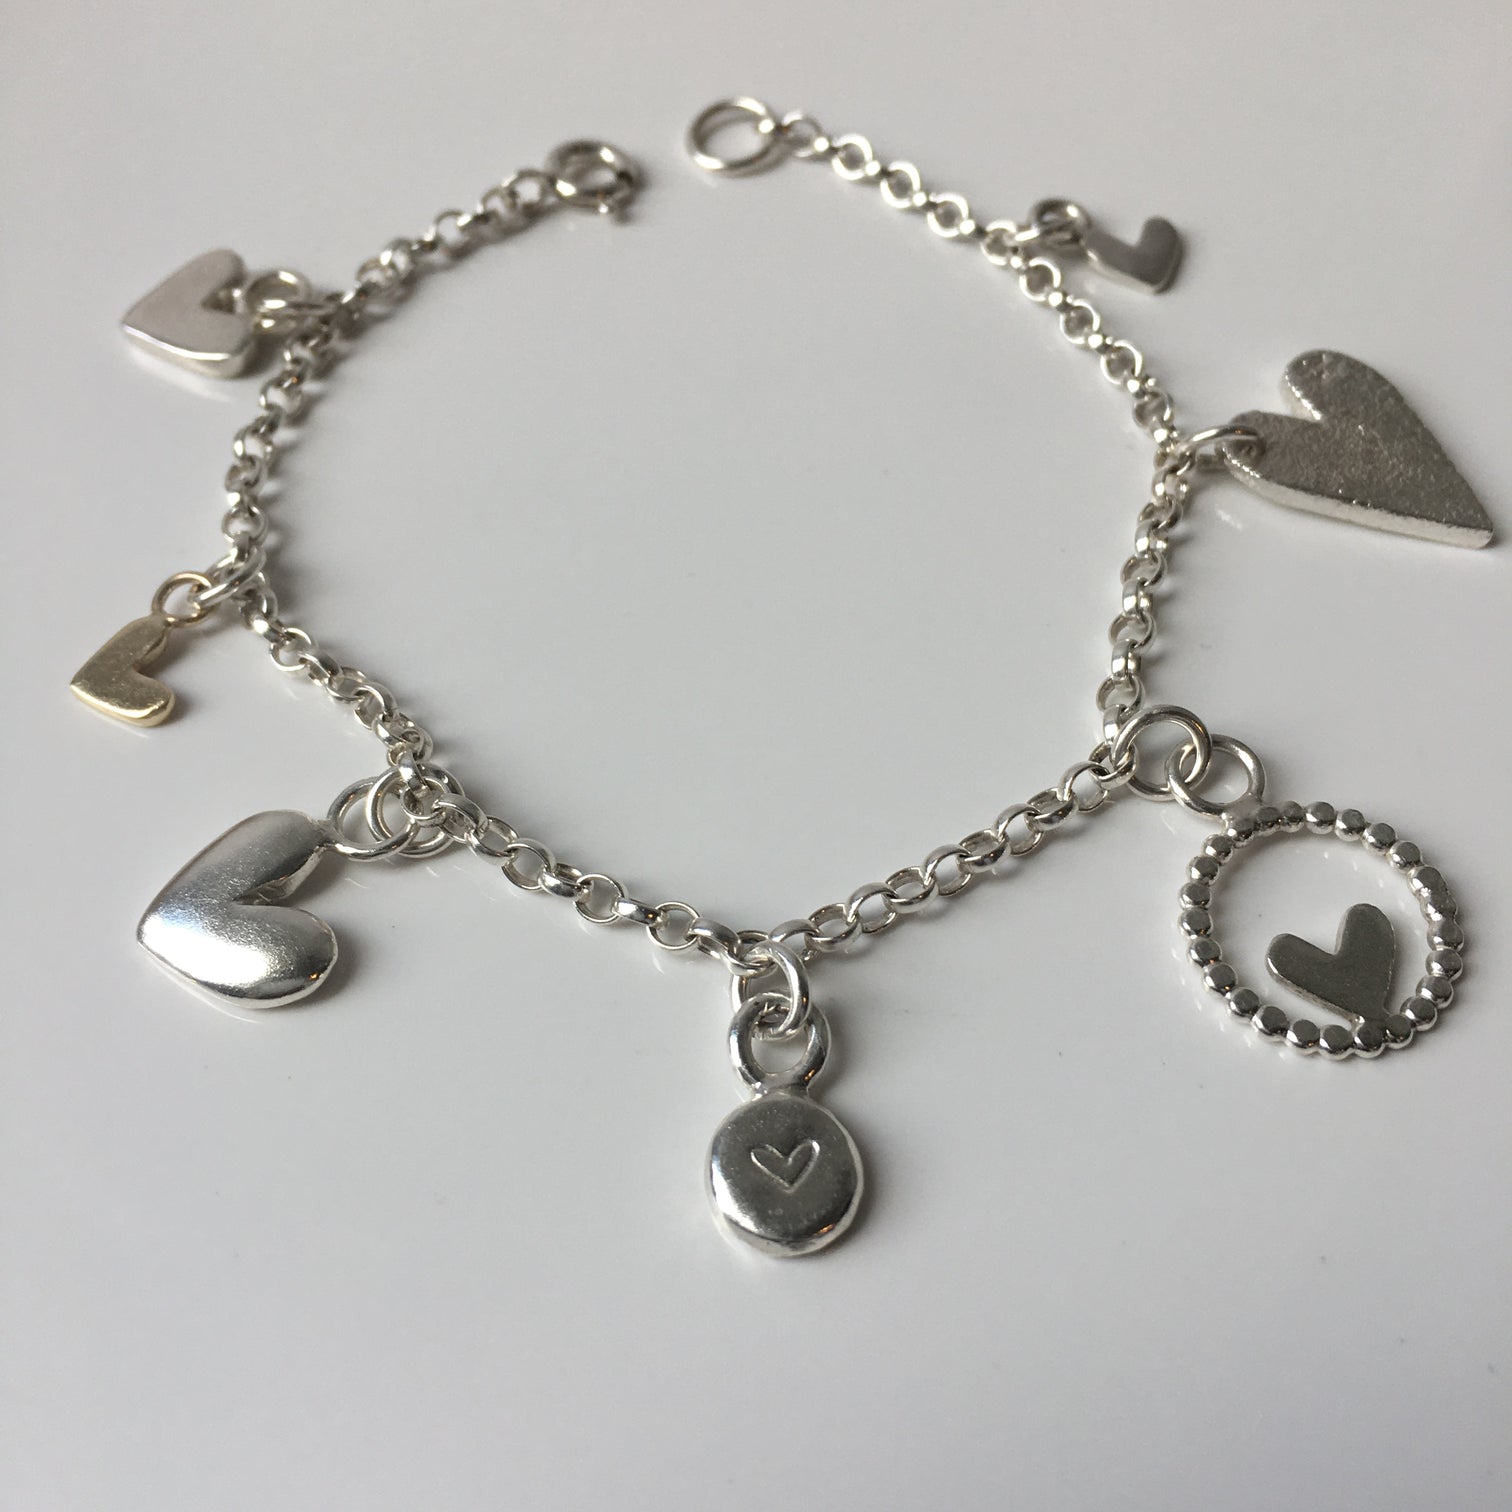 Designs by Lucy Jewellery - handmade silver and gold jewellery ...